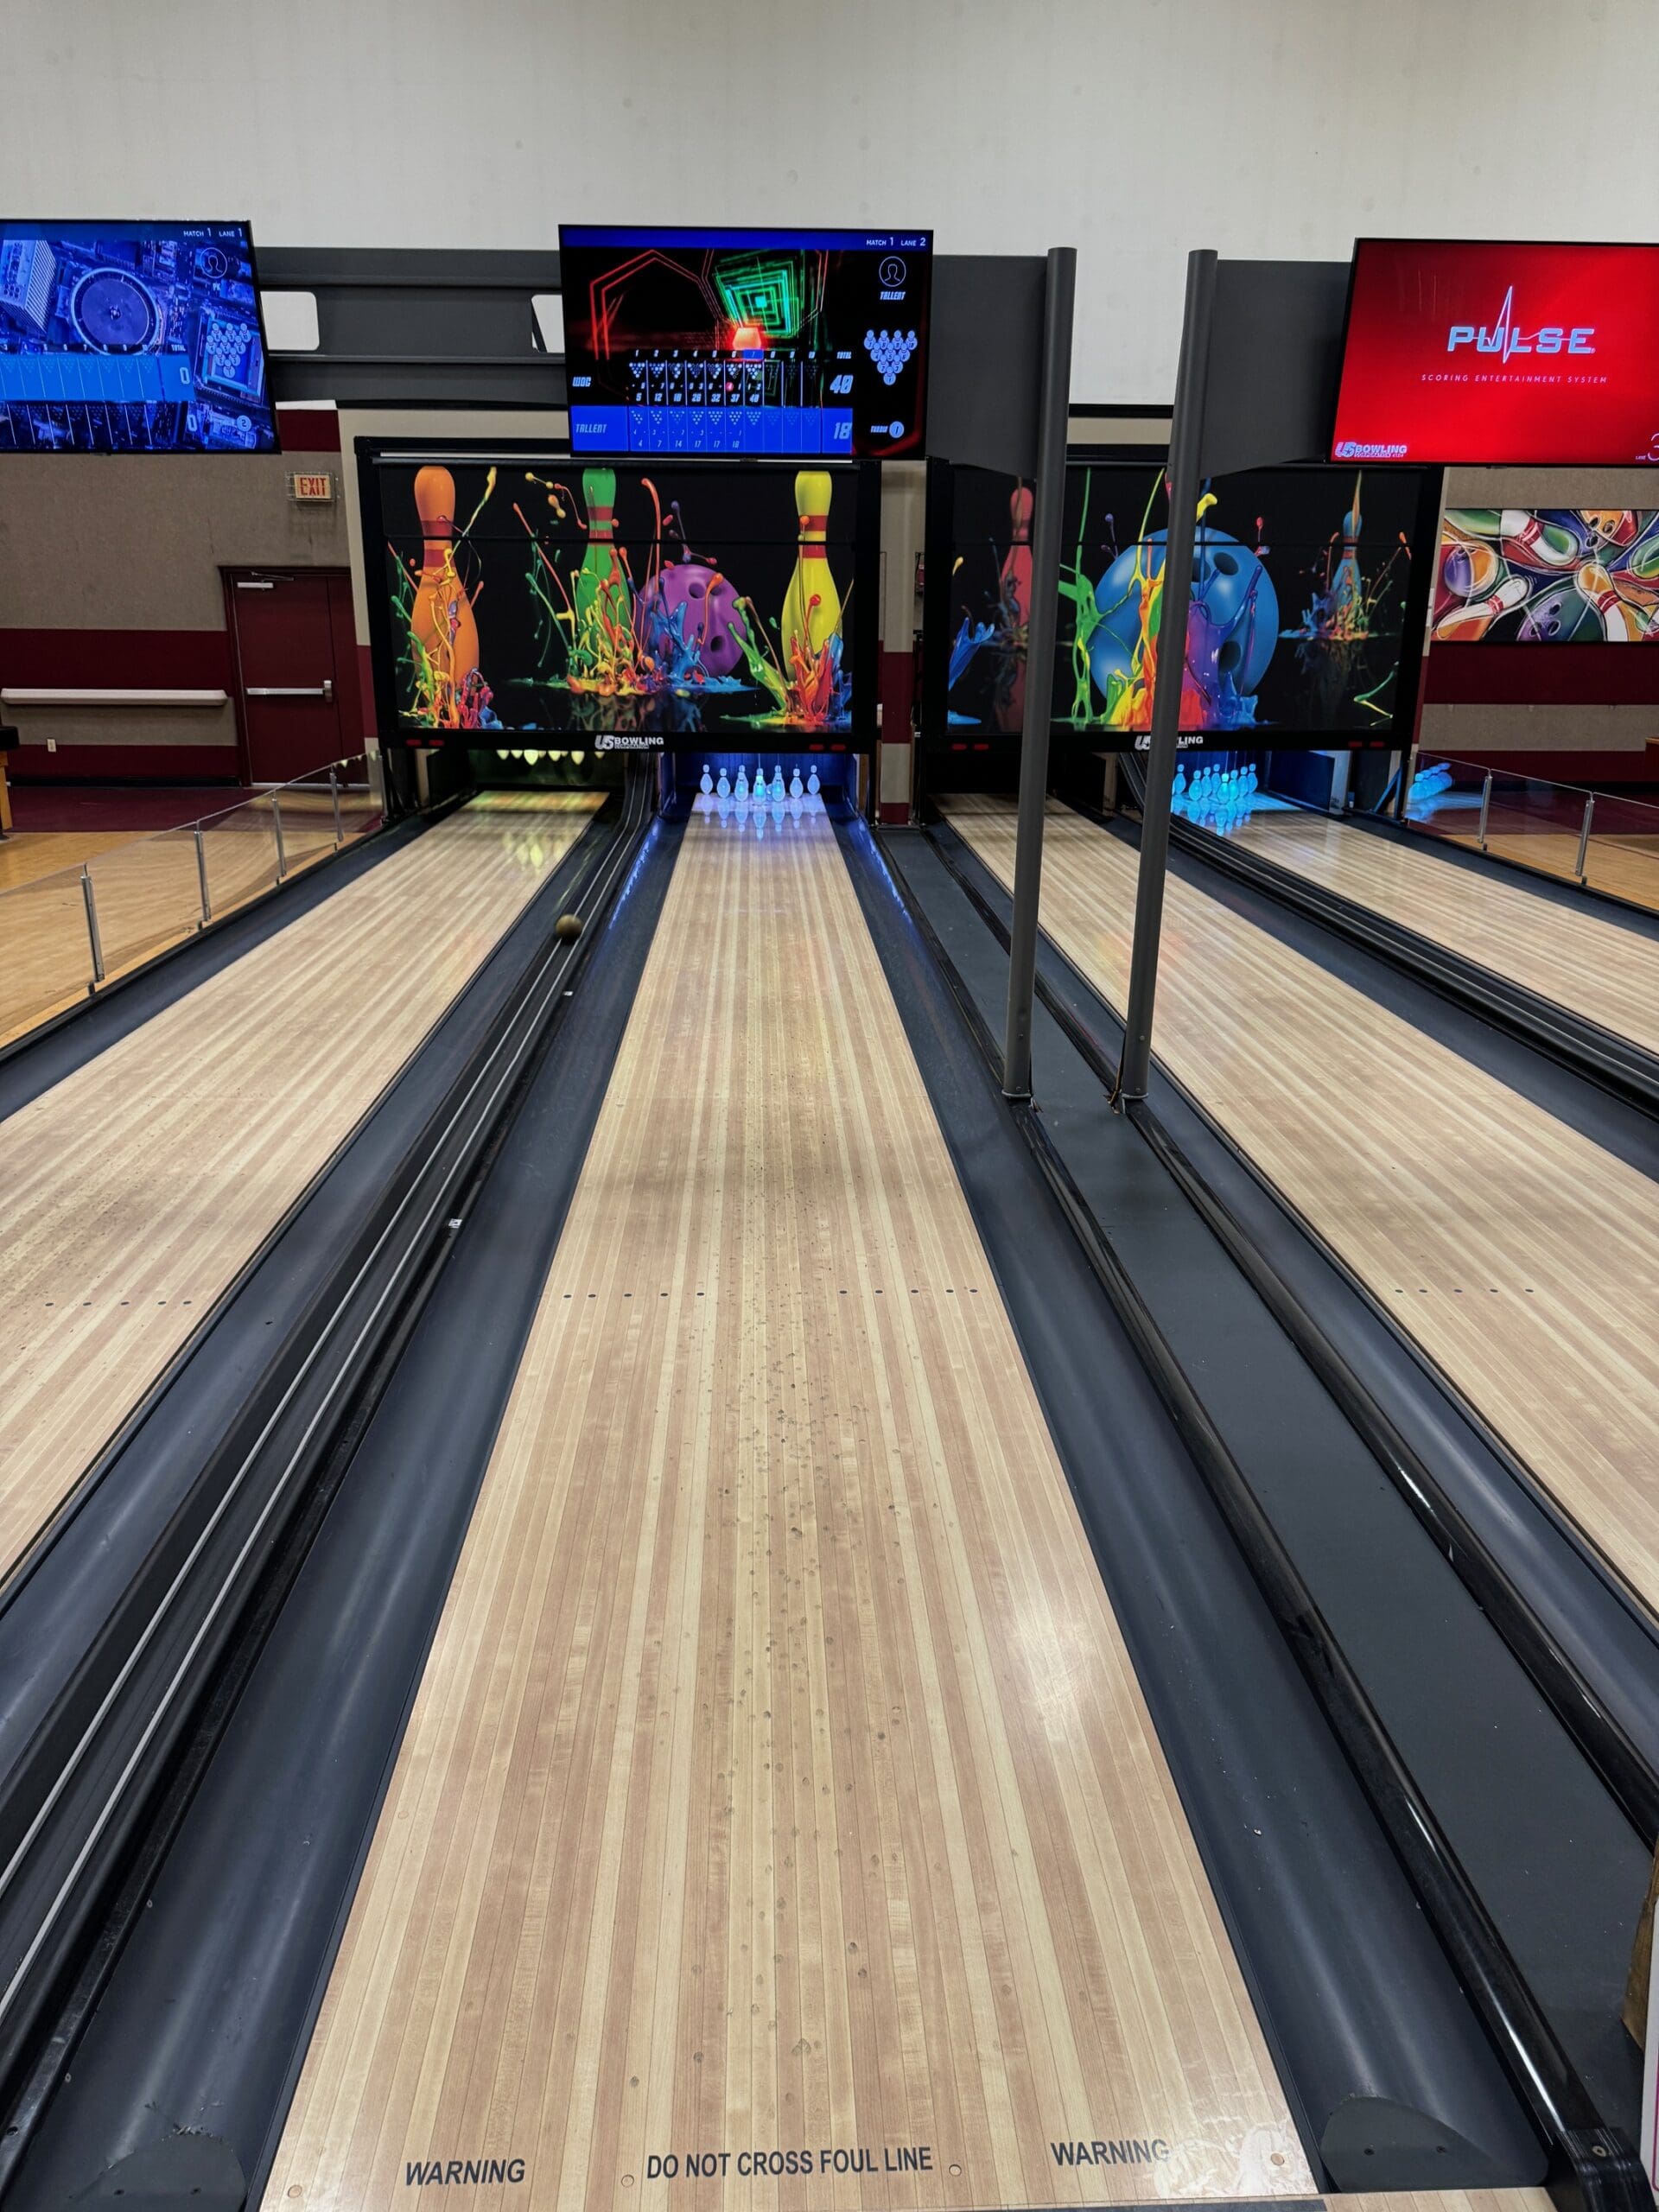 Like-new duck pin bowling package for sale